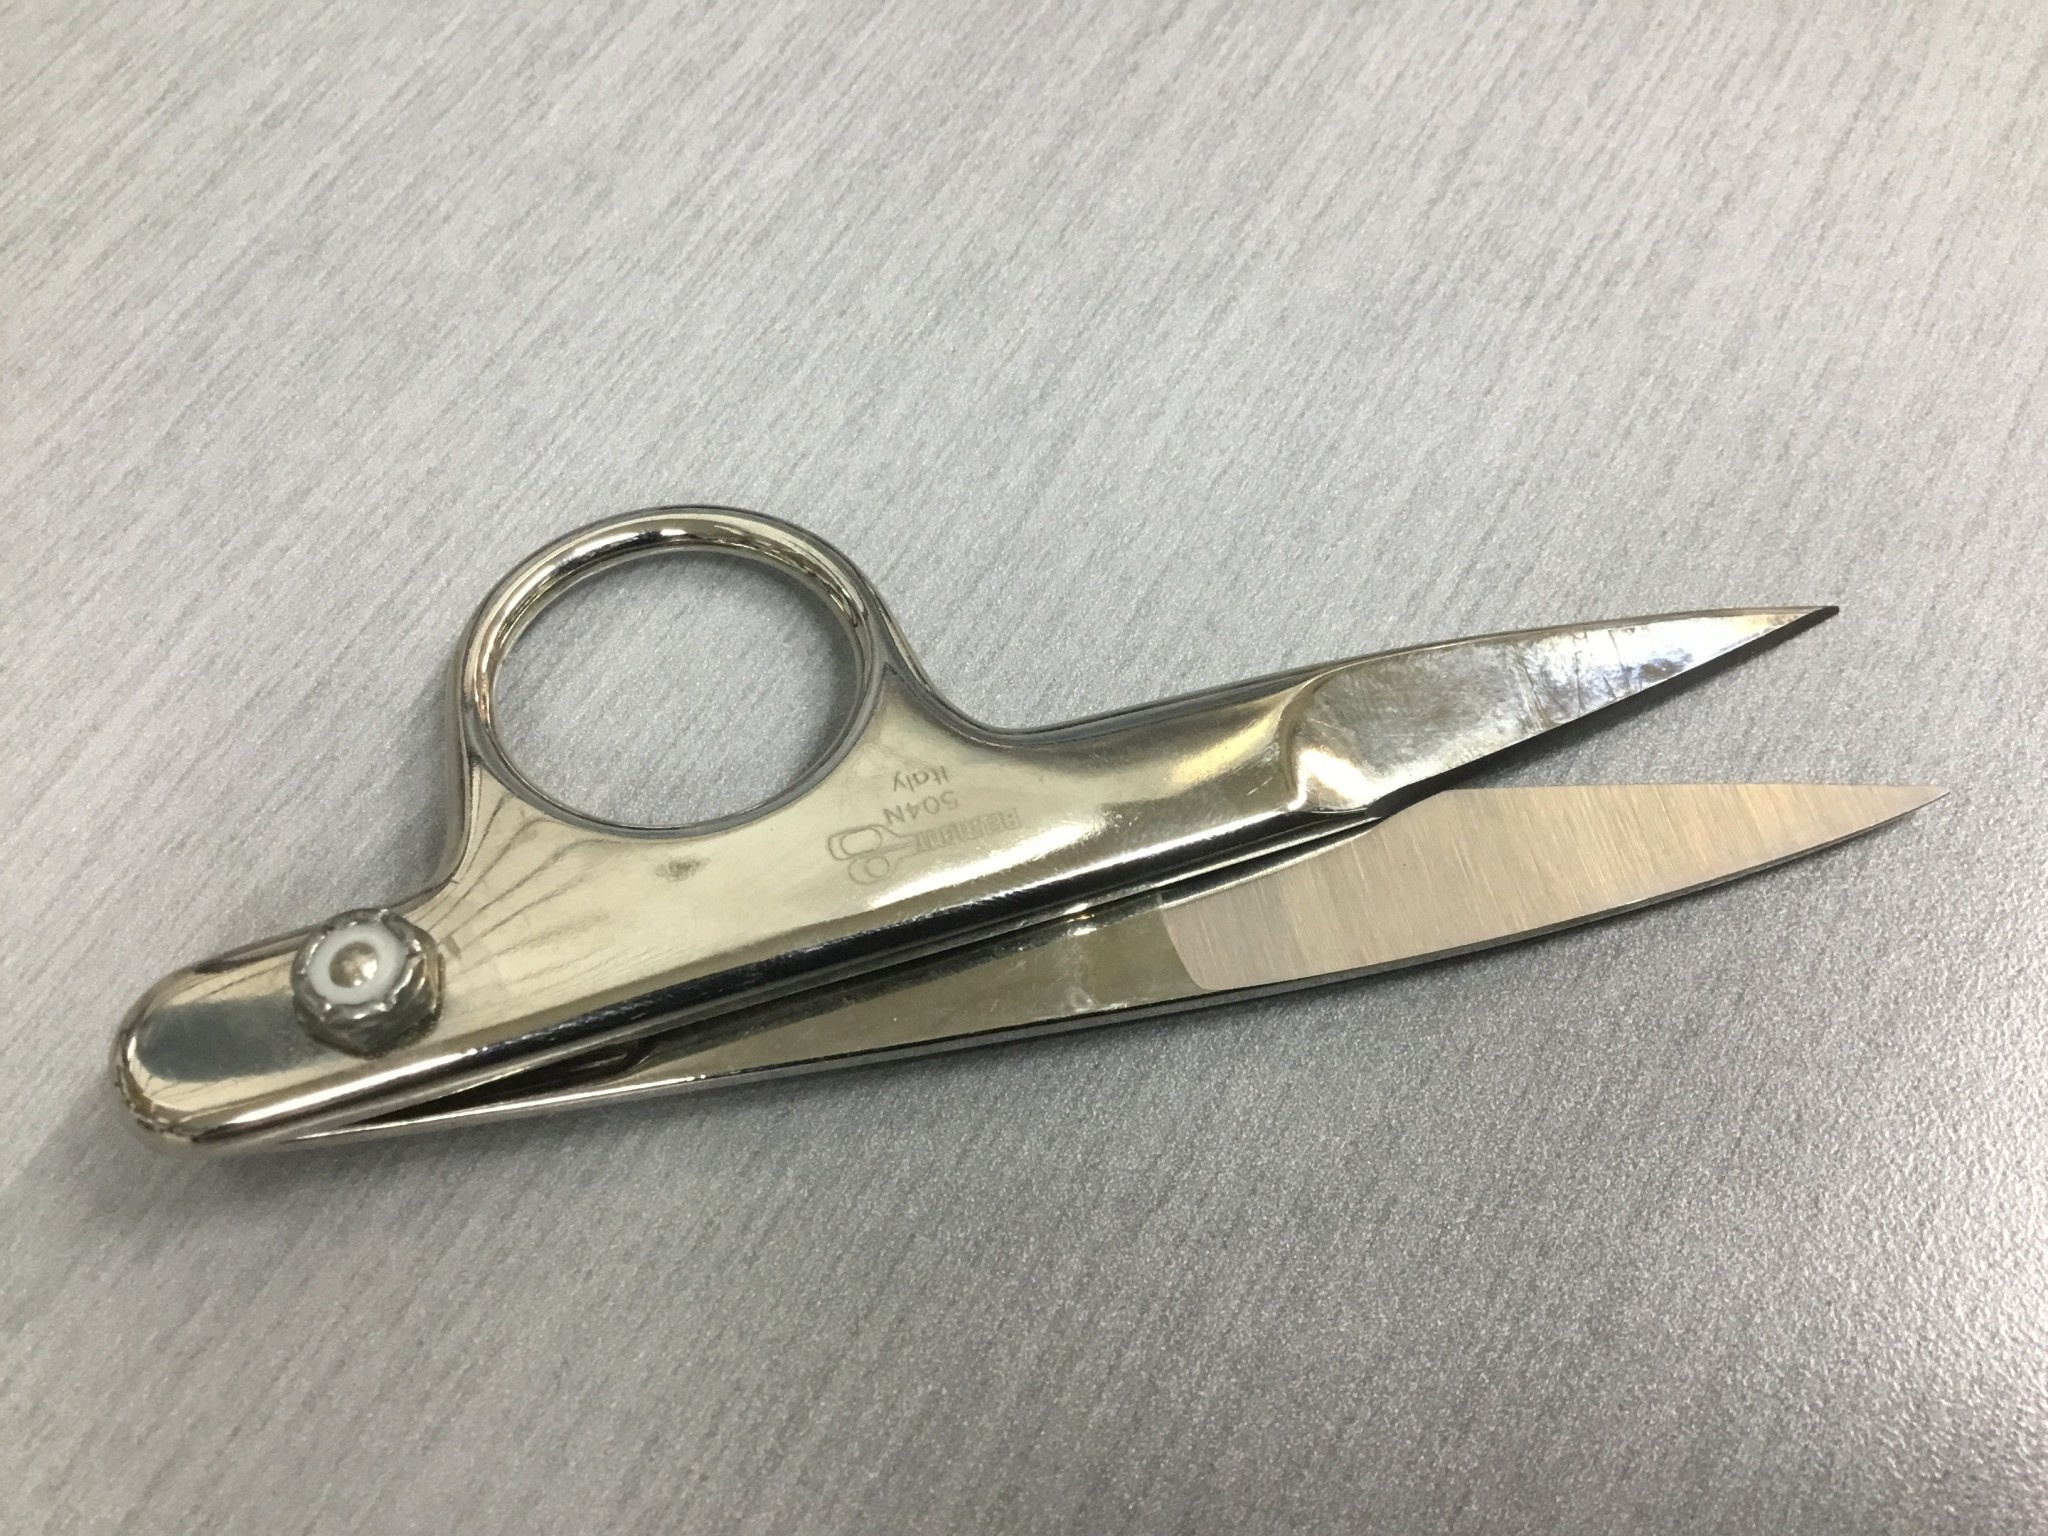 Belmont Belmont Industrial Wire Cutter replaces Gold seal